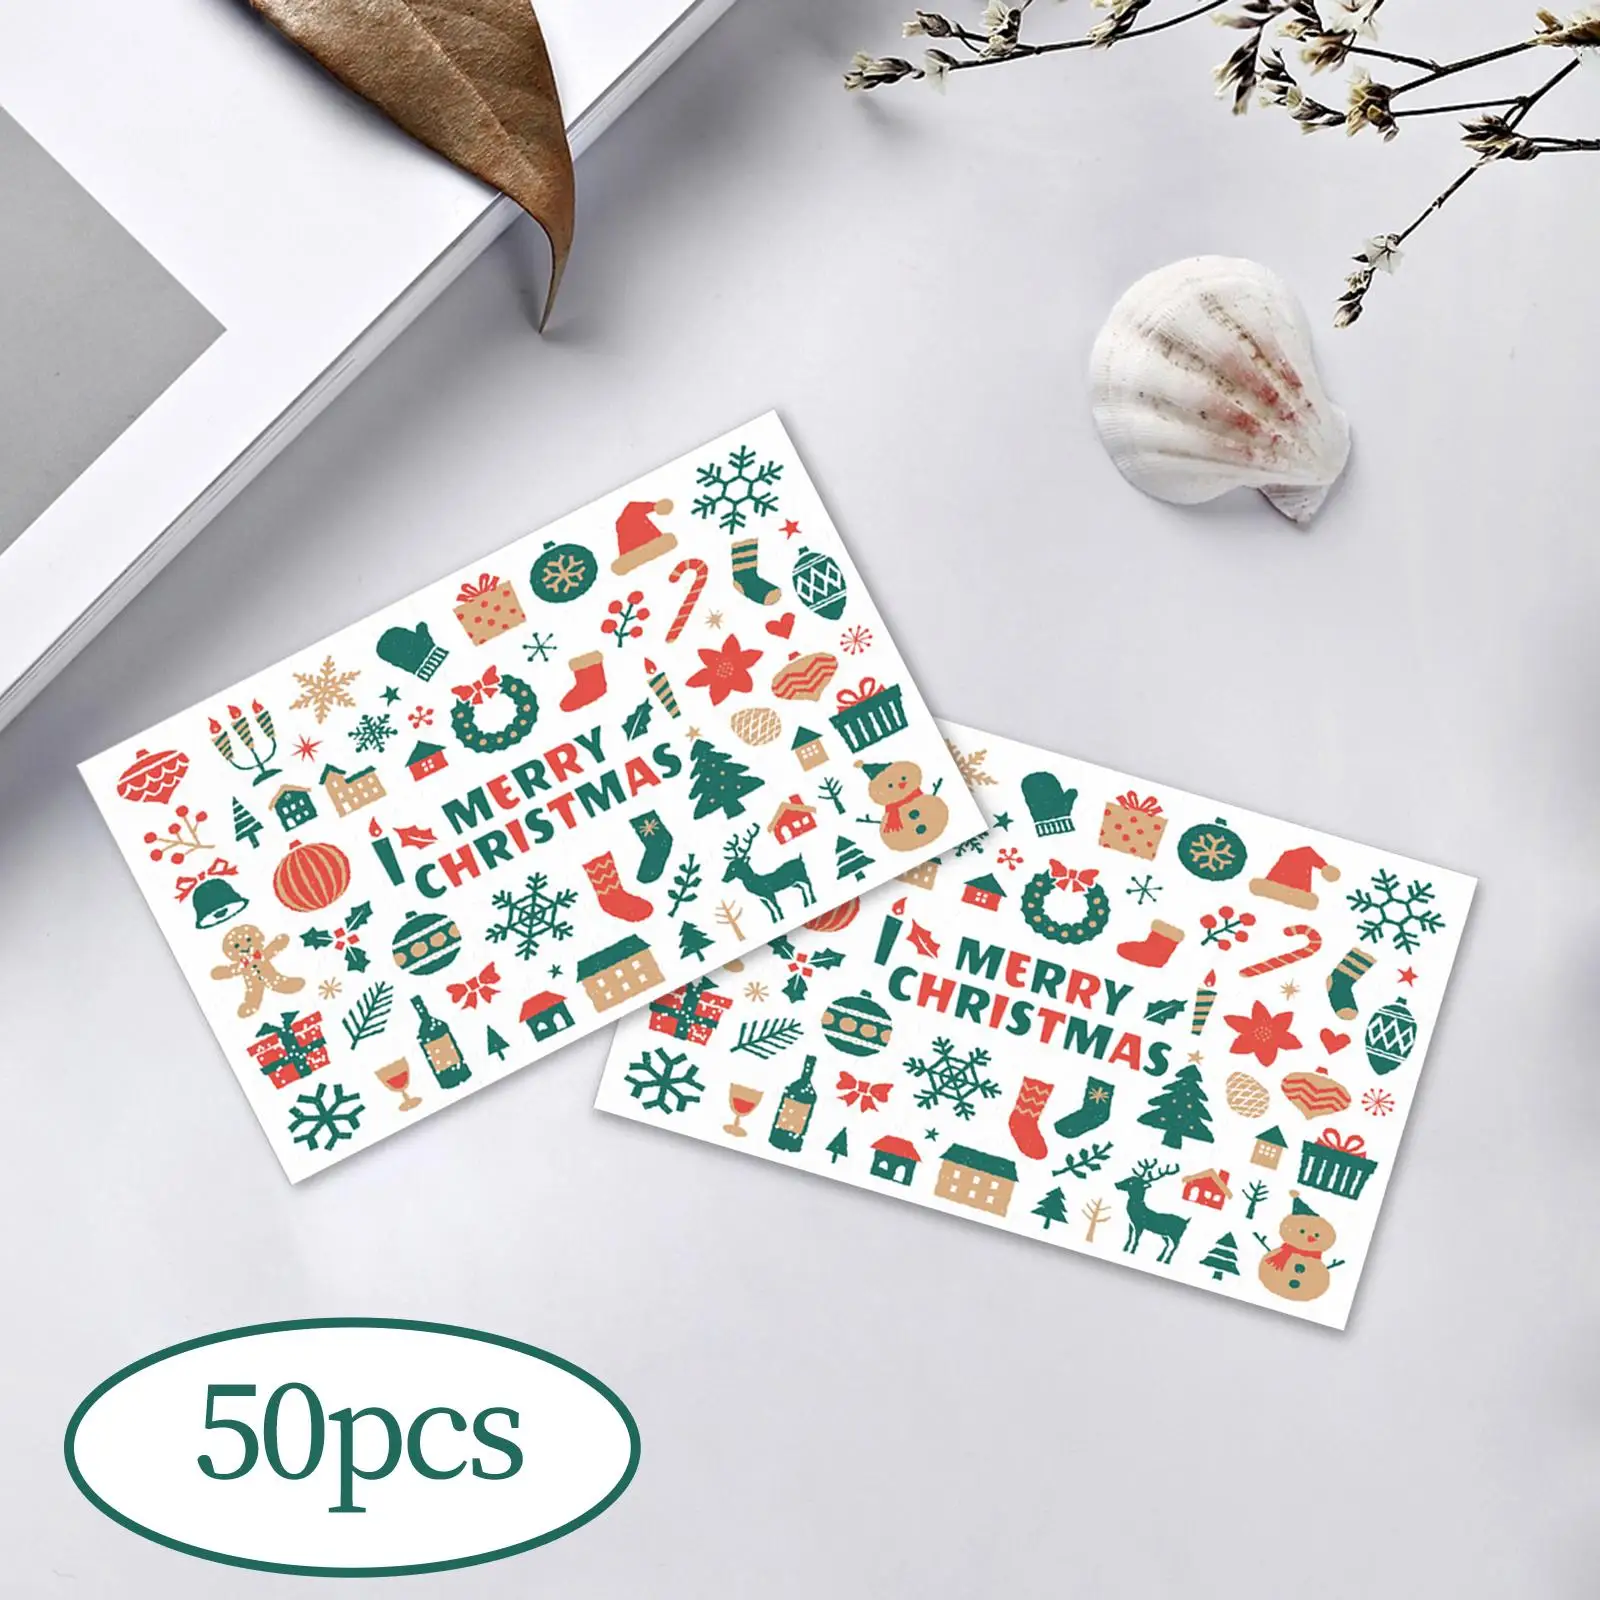 50x Cute Merry Christmas Cards Greeting Cards Christmas Tree Snowman Gift Projects for Holiday Festival Birthday Wedding Party